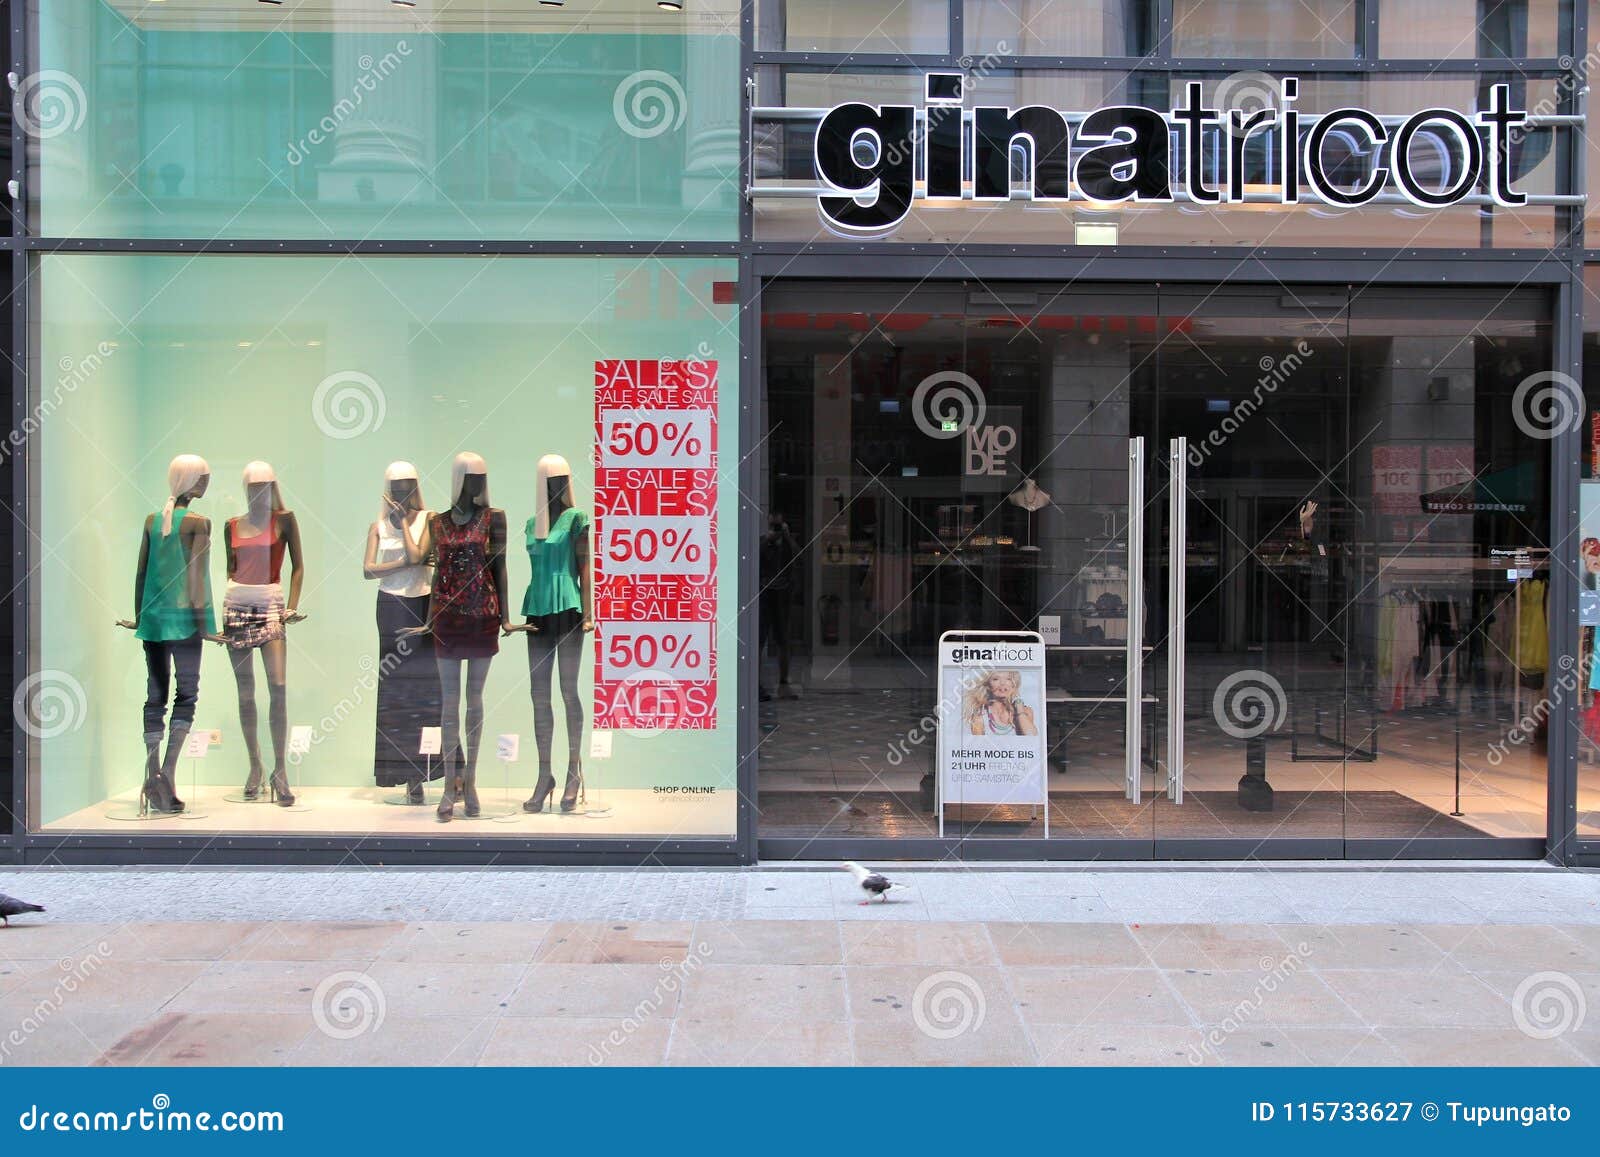 tand jord glemsom Ginatricot Store Photos - Free & Royalty-Free Stock Photos from Dreamstime